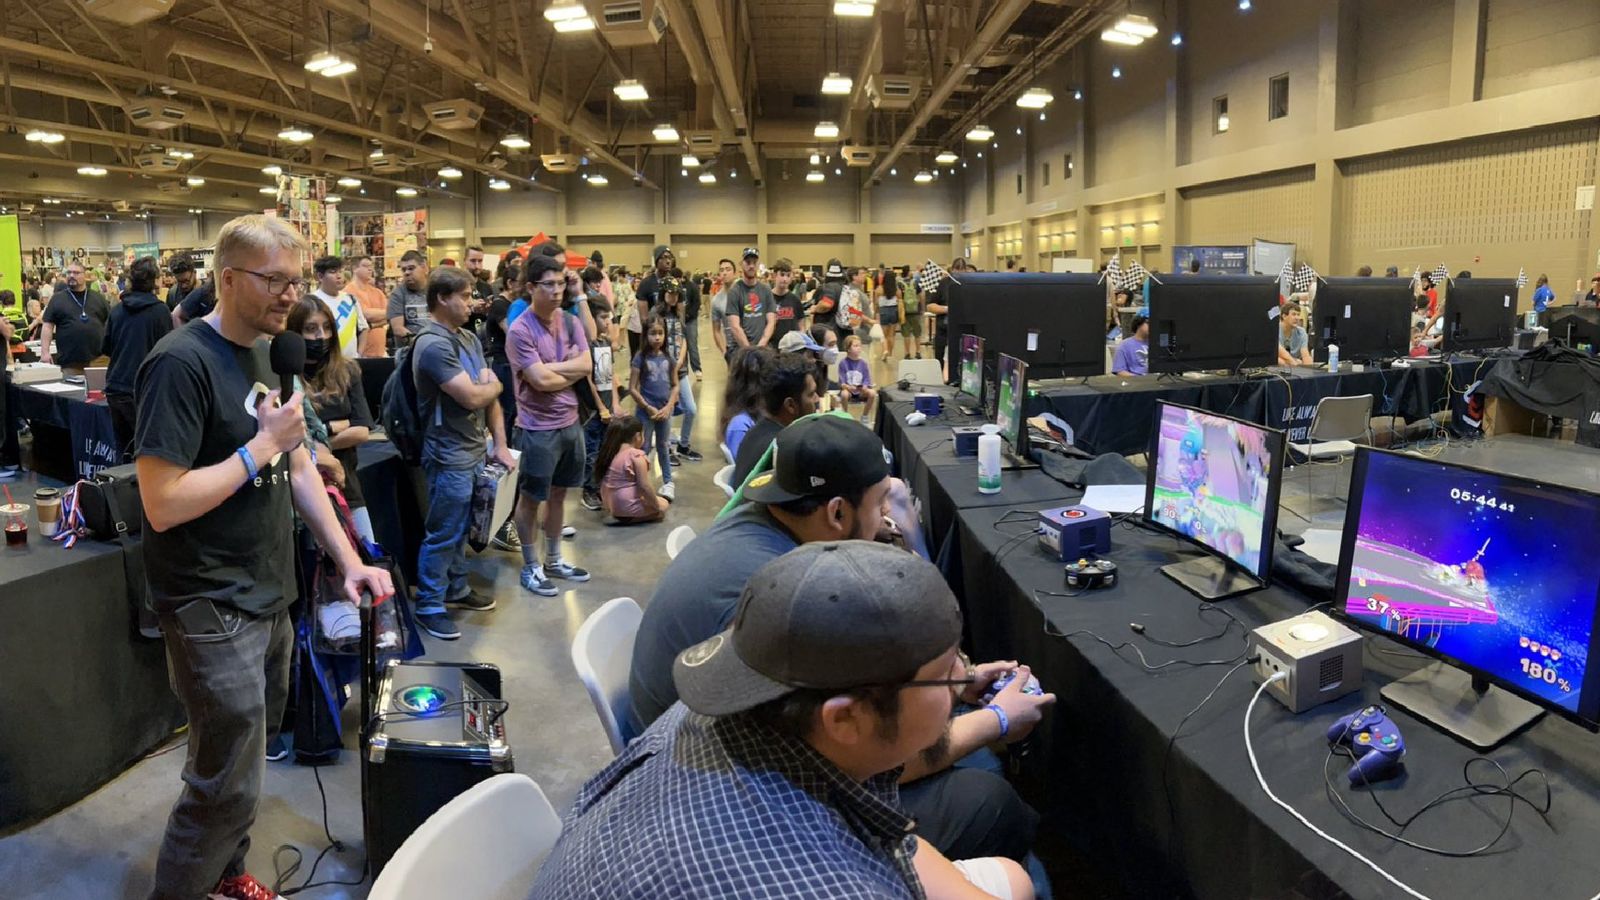 EON Gaming’s Justin Scerbo showcasing GCHD in a public game of Super Smash Bros Melee